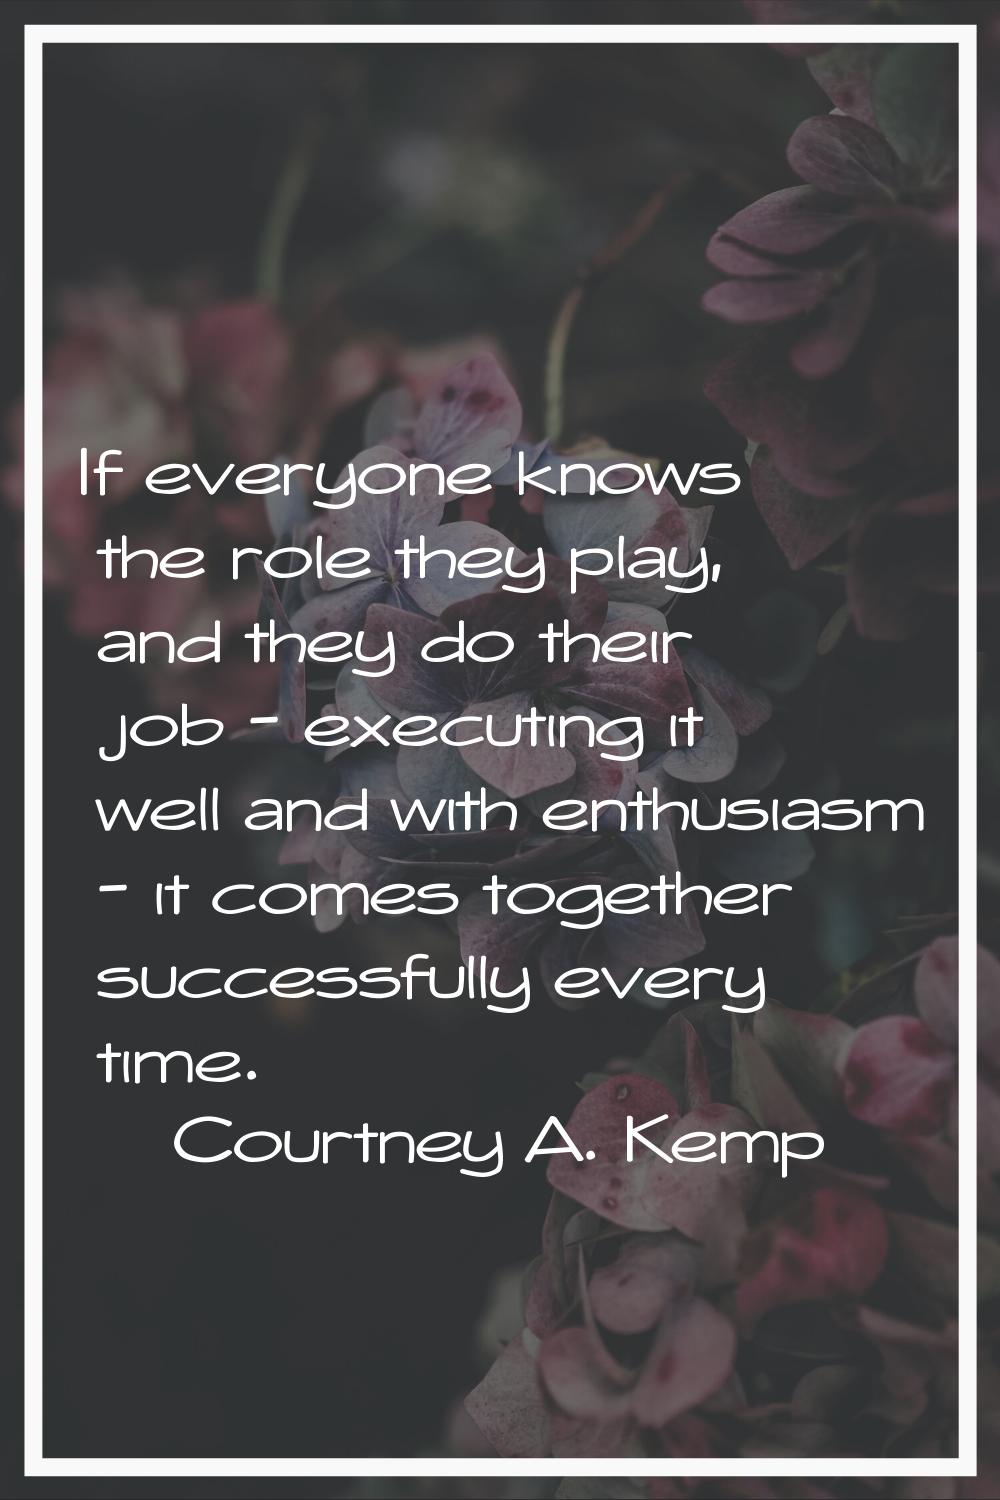 If everyone knows the role they play, and they do their job - executing it well and with enthusiasm